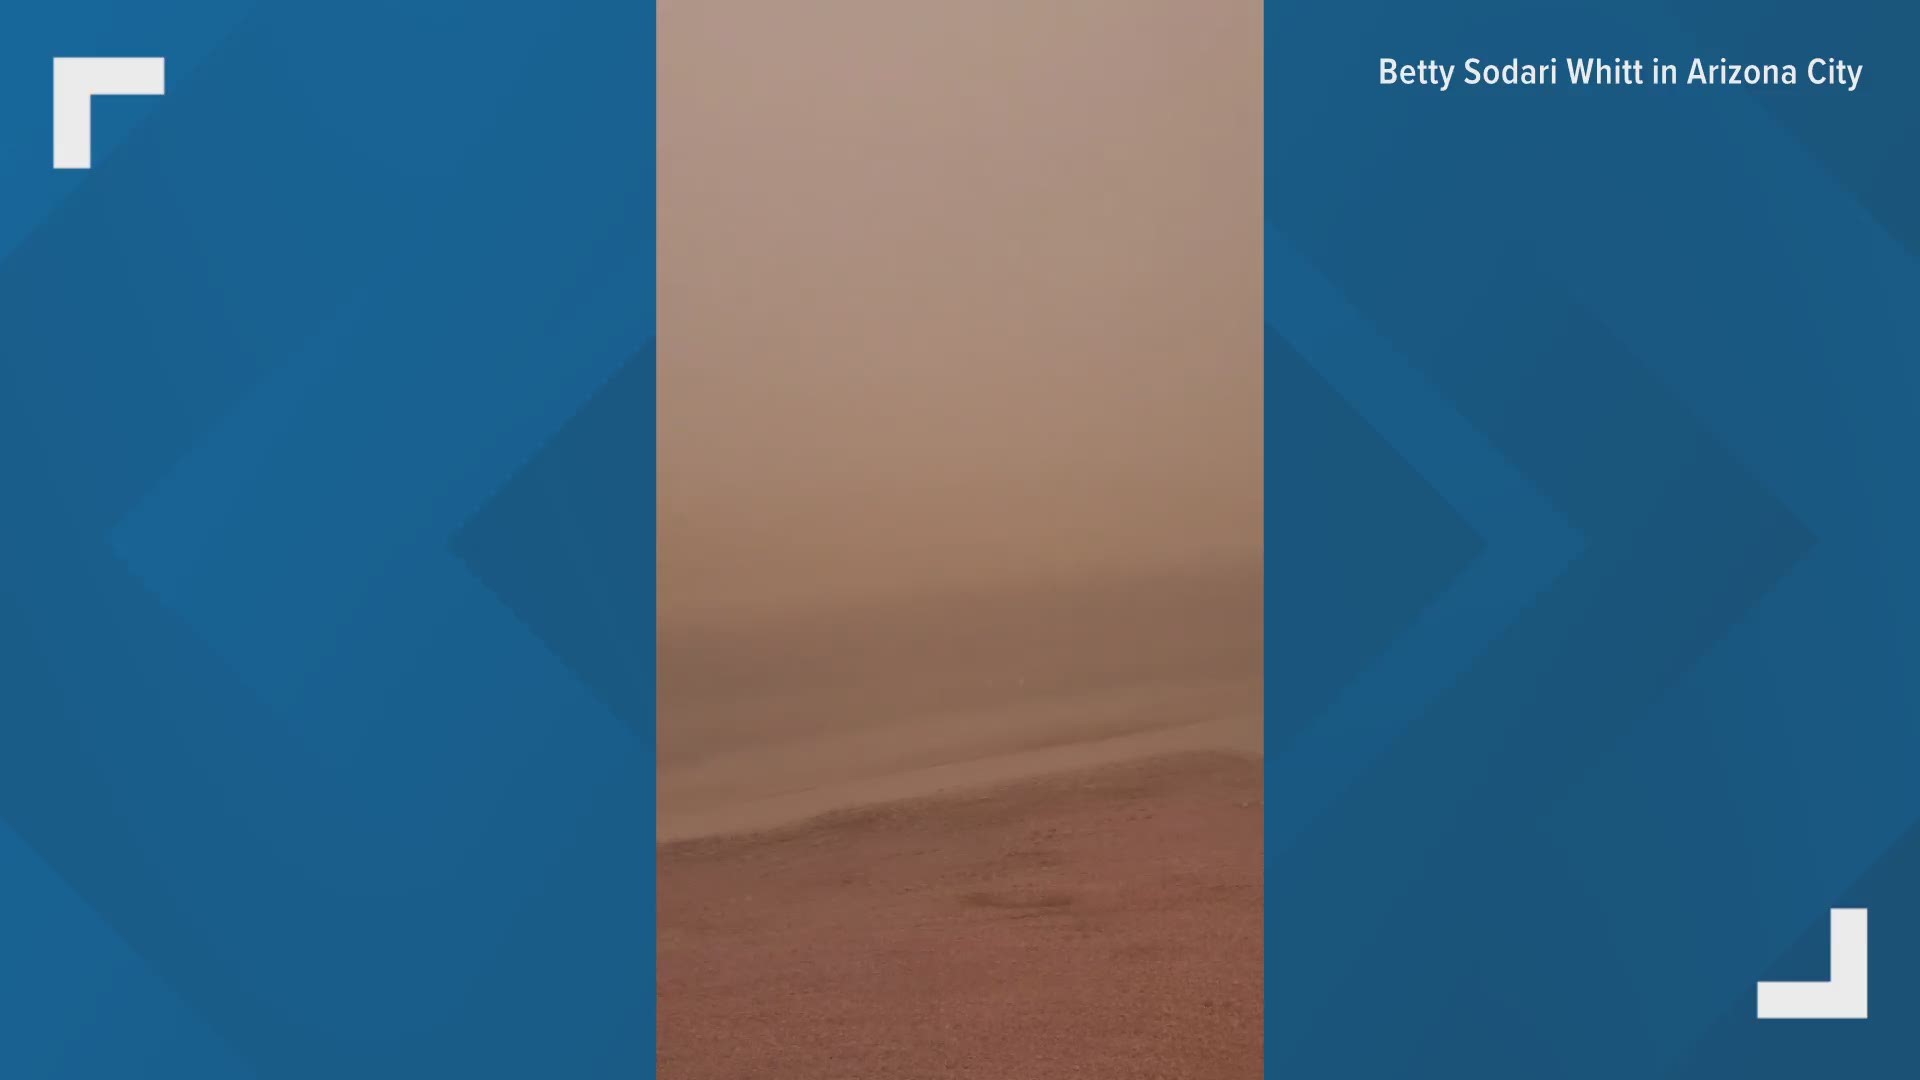 Betty Sodari Whitt in Arizona City captured video of a dust storm moving through the area on Aug. 16, 2020.